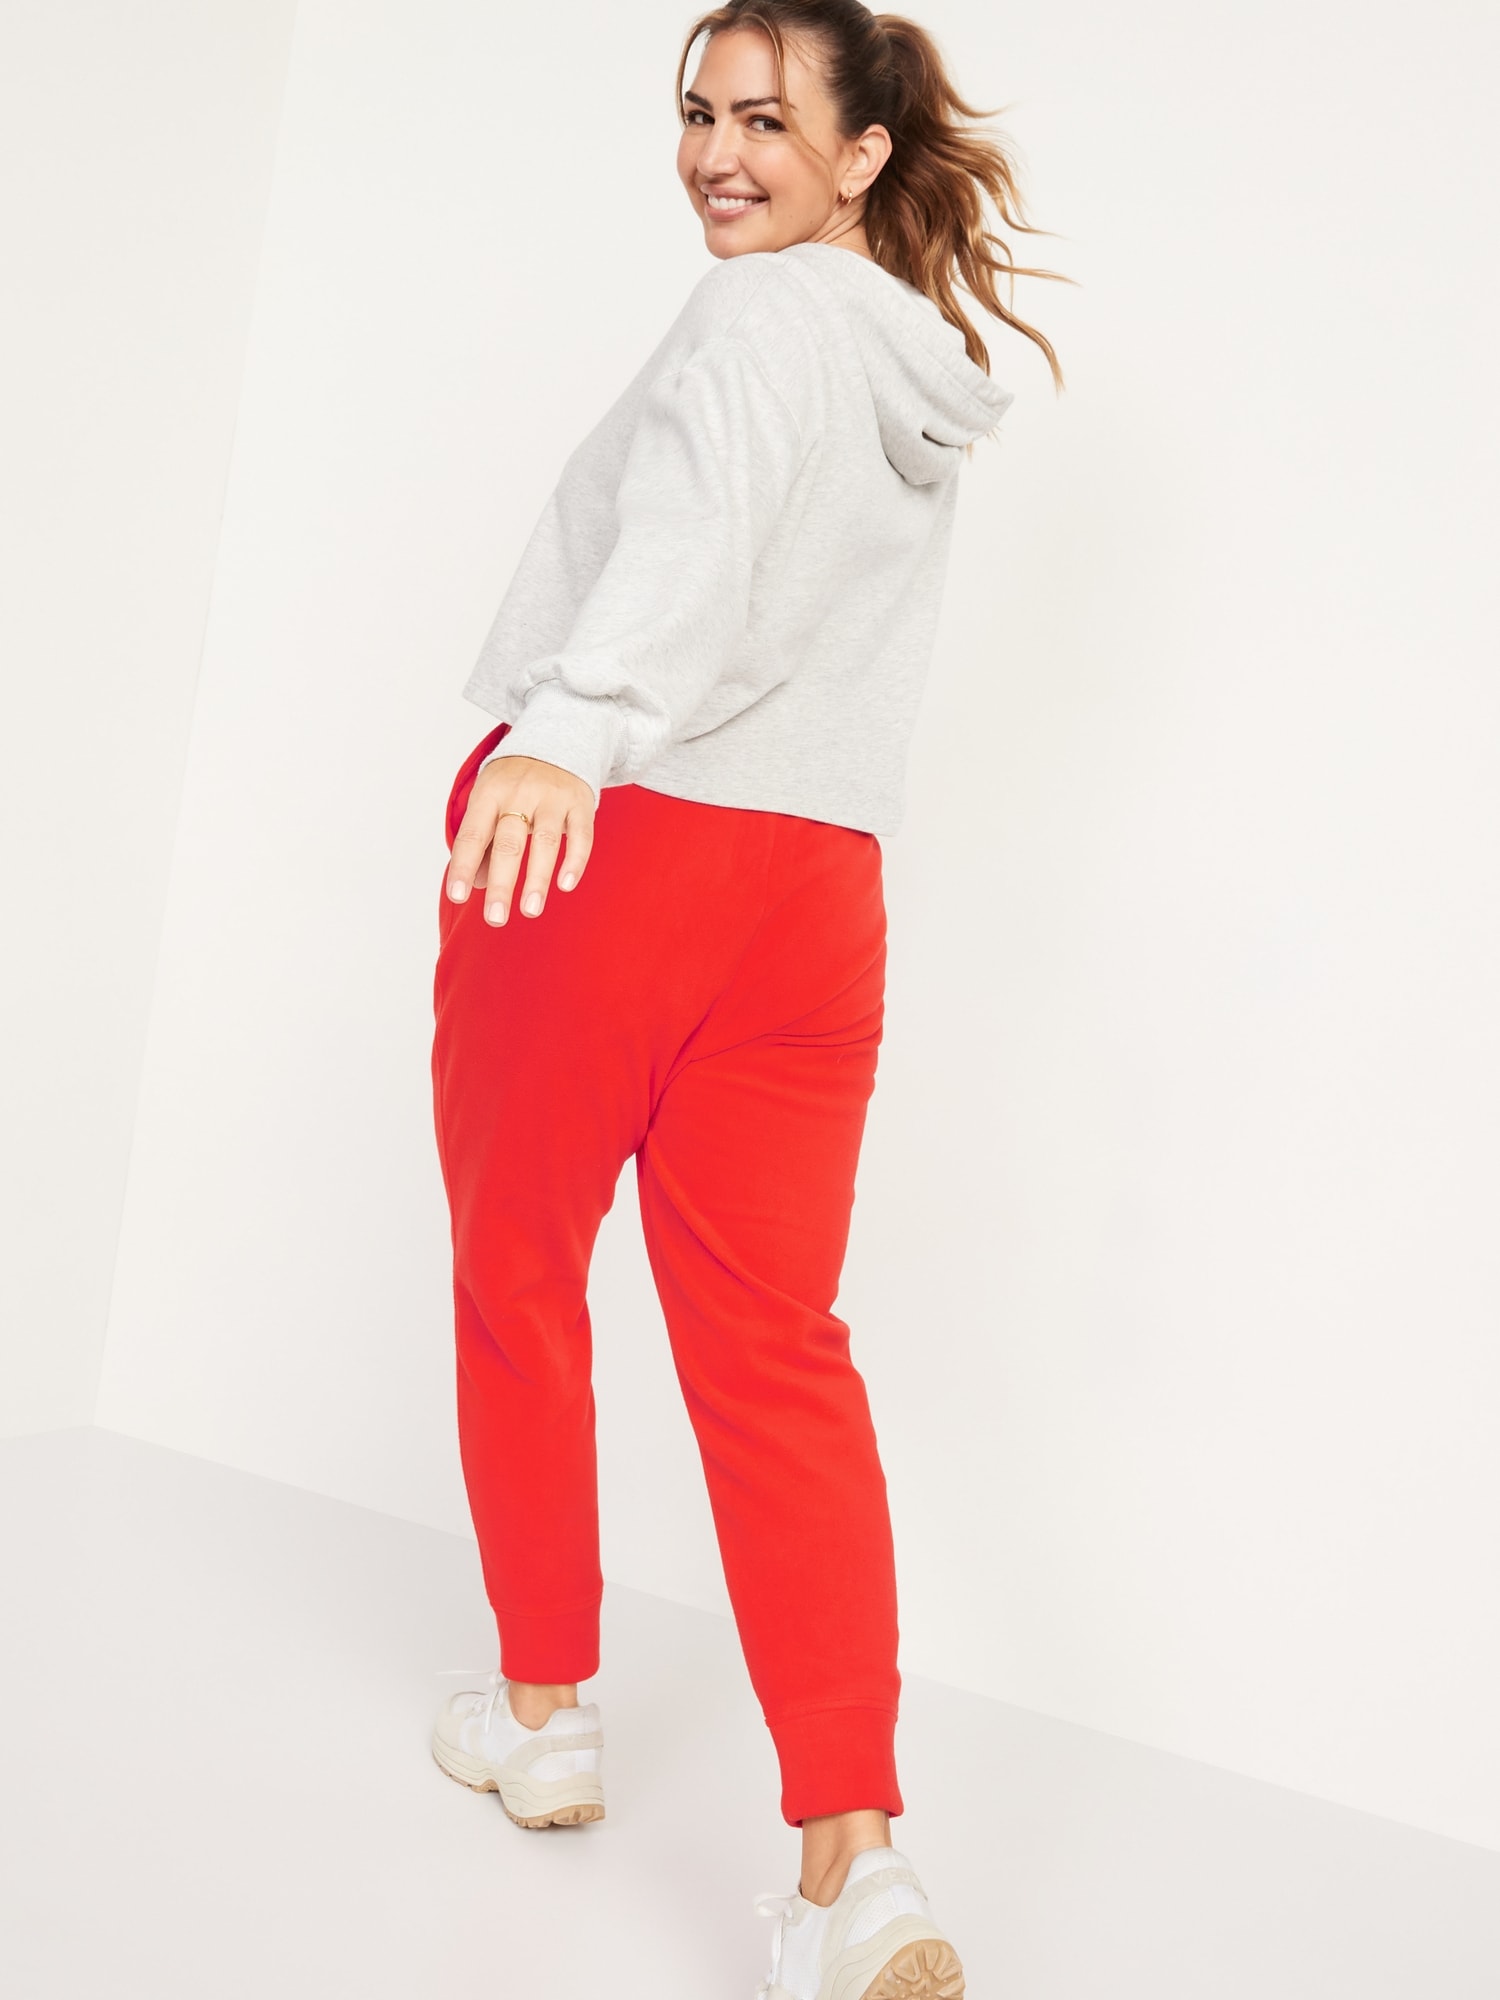 Old Navy High-Waisted Microfleece Jogger Sweatpants for Girls